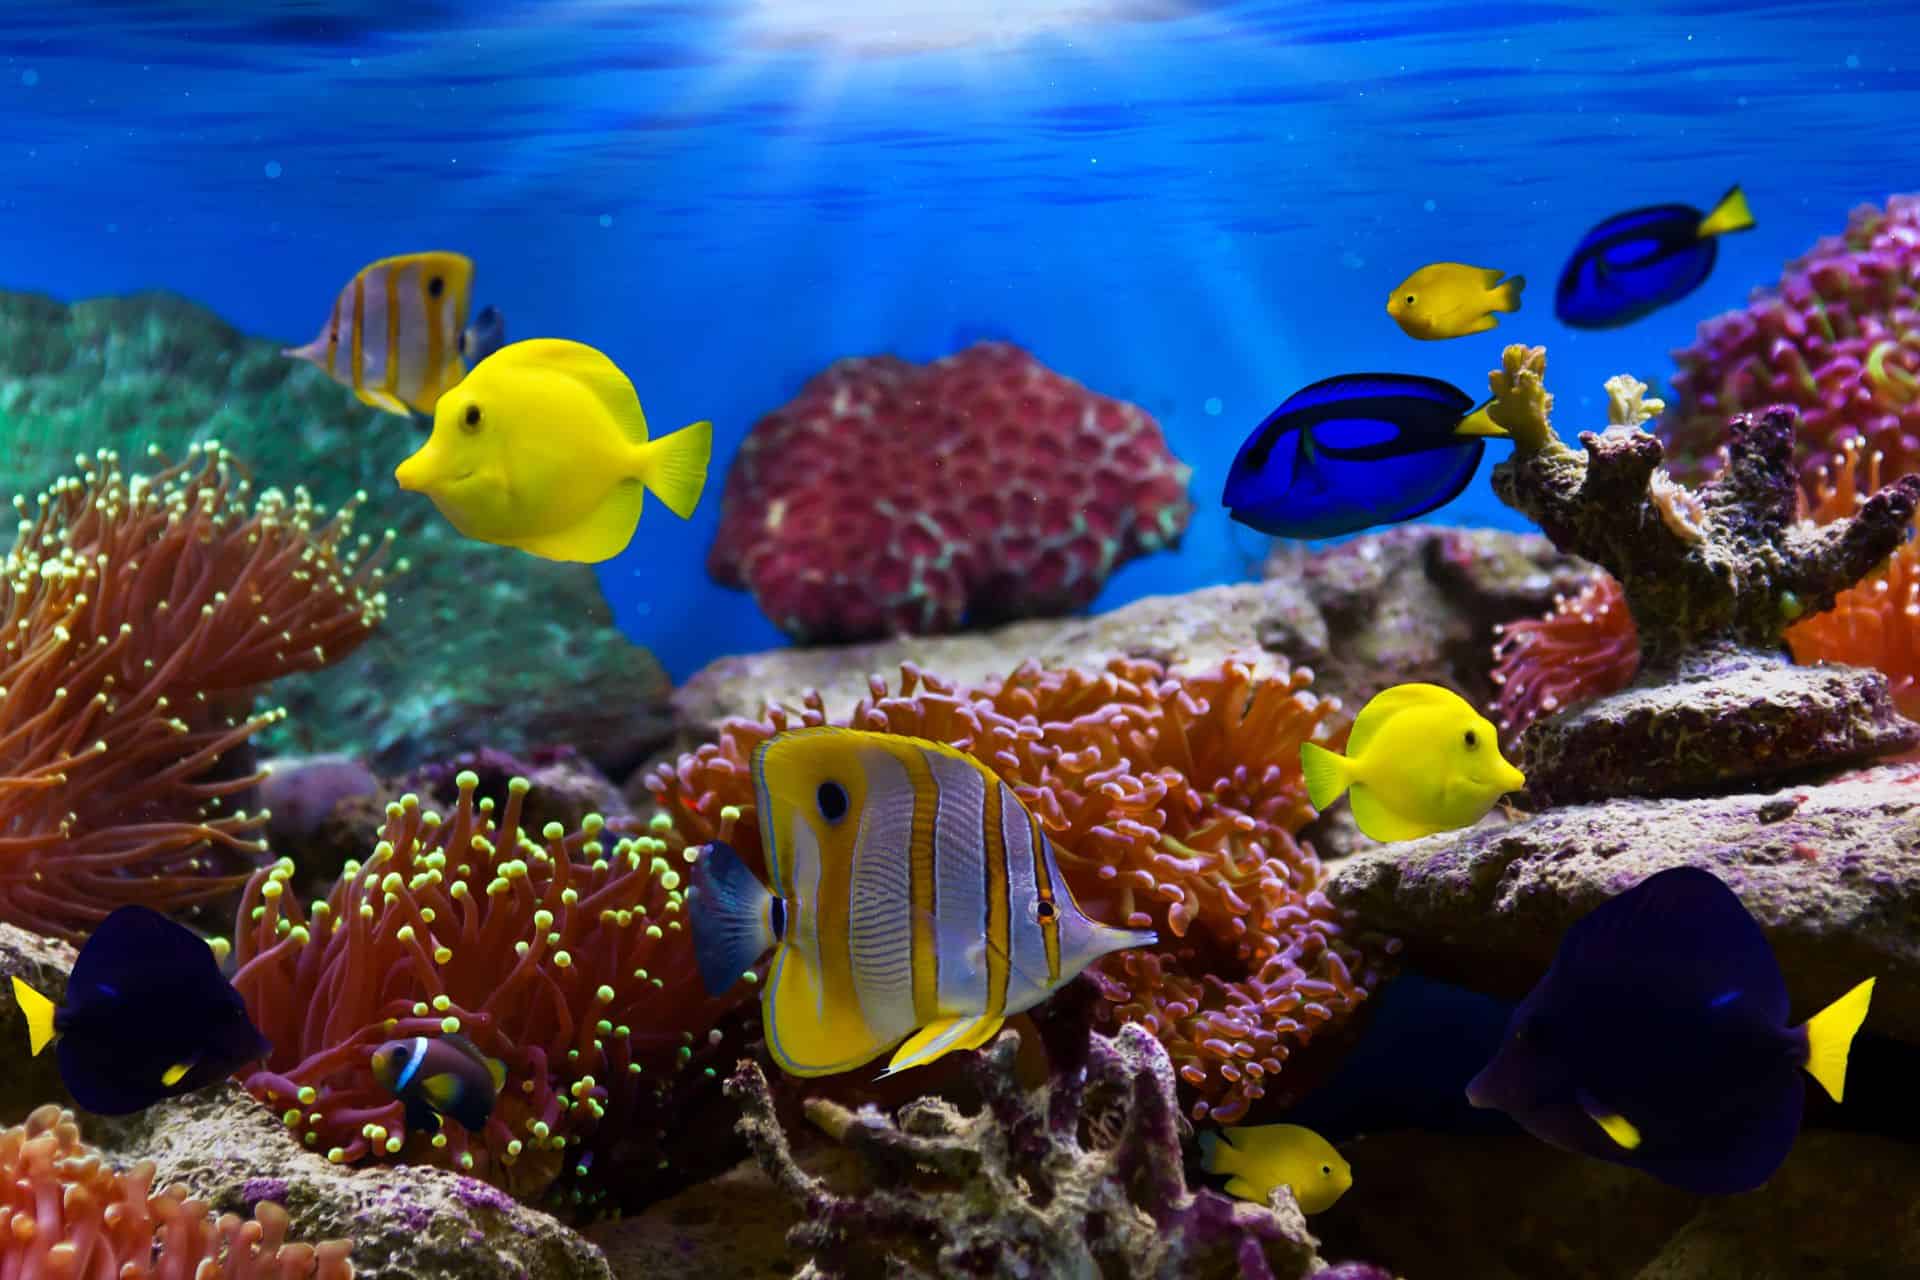 Top Tips When Starting a Tropical Fish Tank